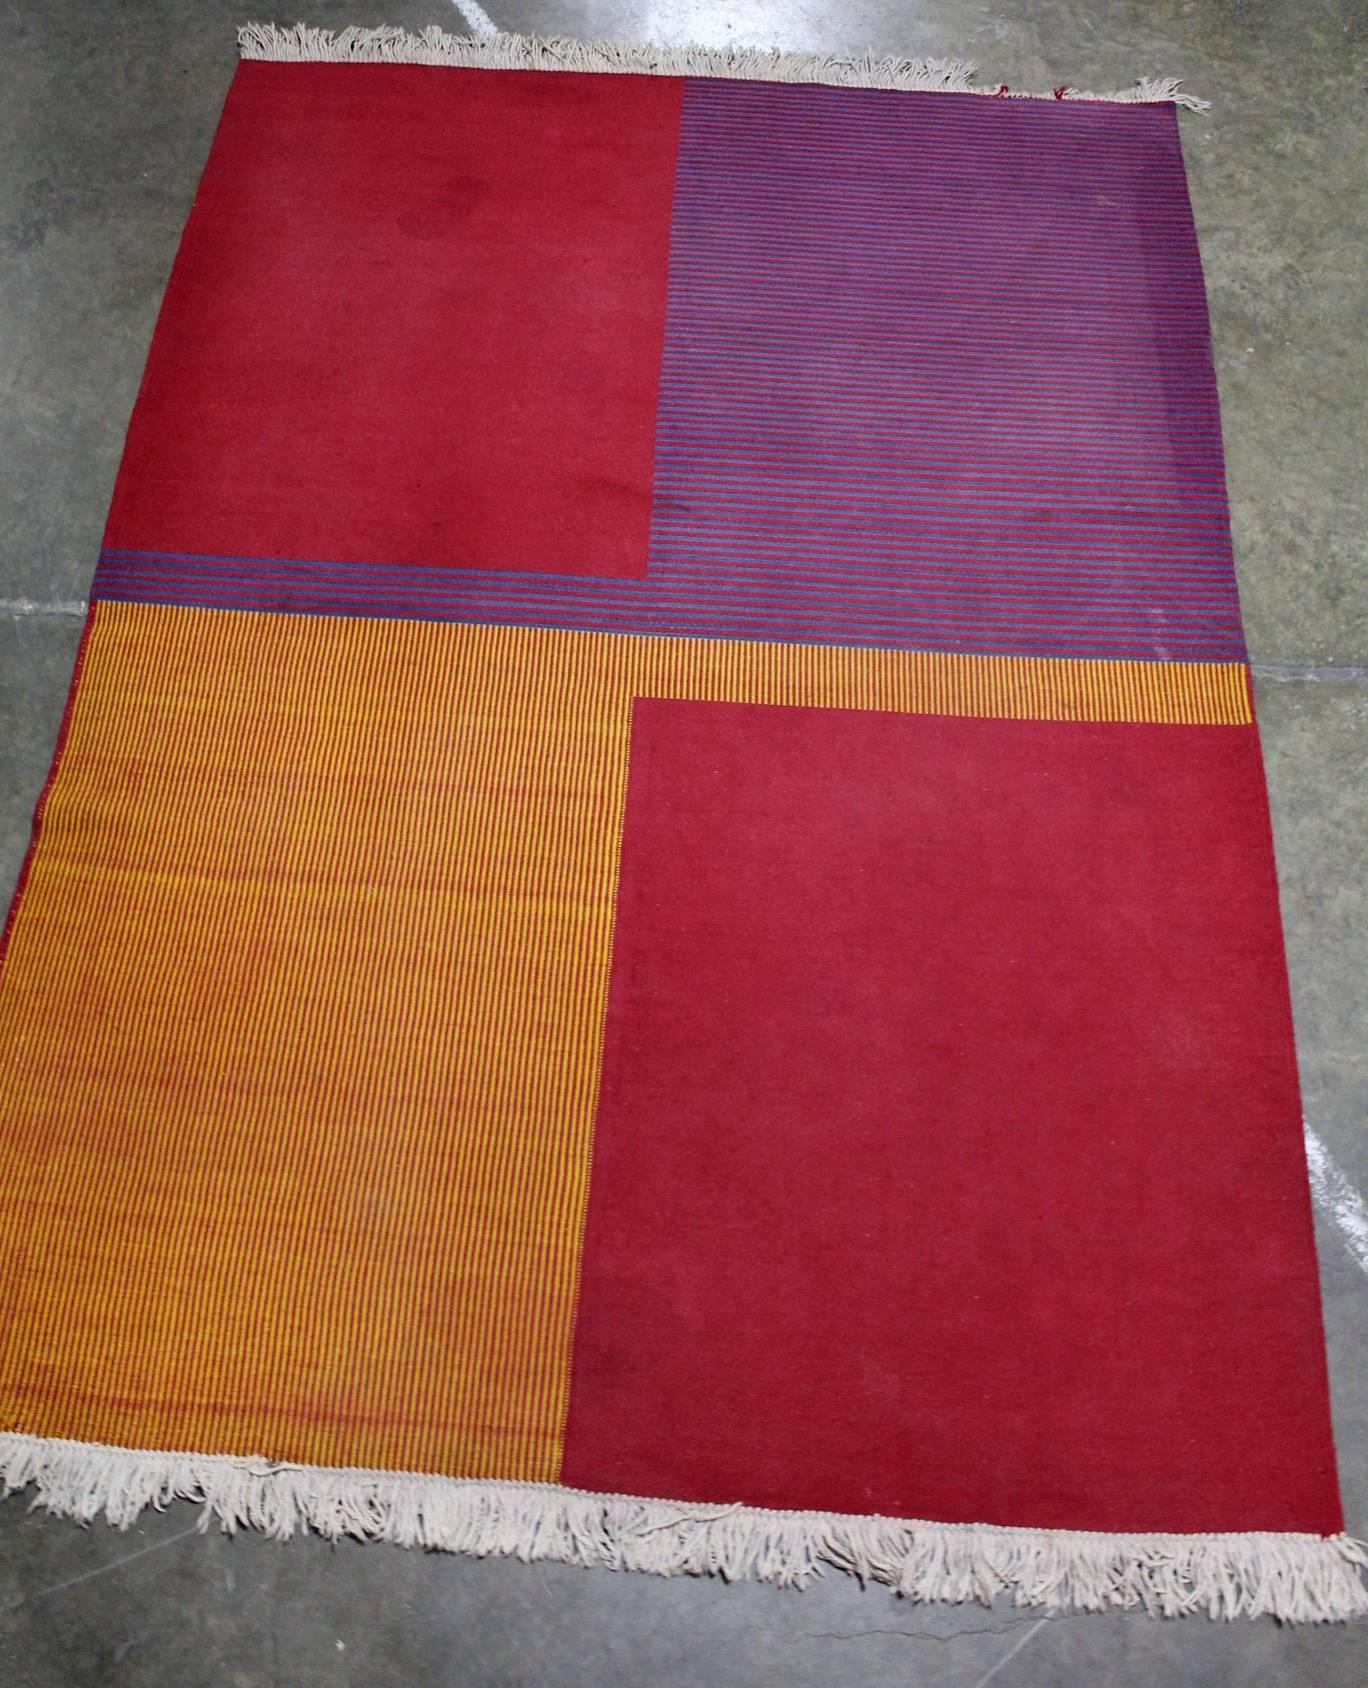 Rectangular woven wool carpet with geometrical pattern designed by Antonin Kybal.
Great example of modernist Czech design from 1920s.
Vibrant colors, few discolorations, some missing fringes.